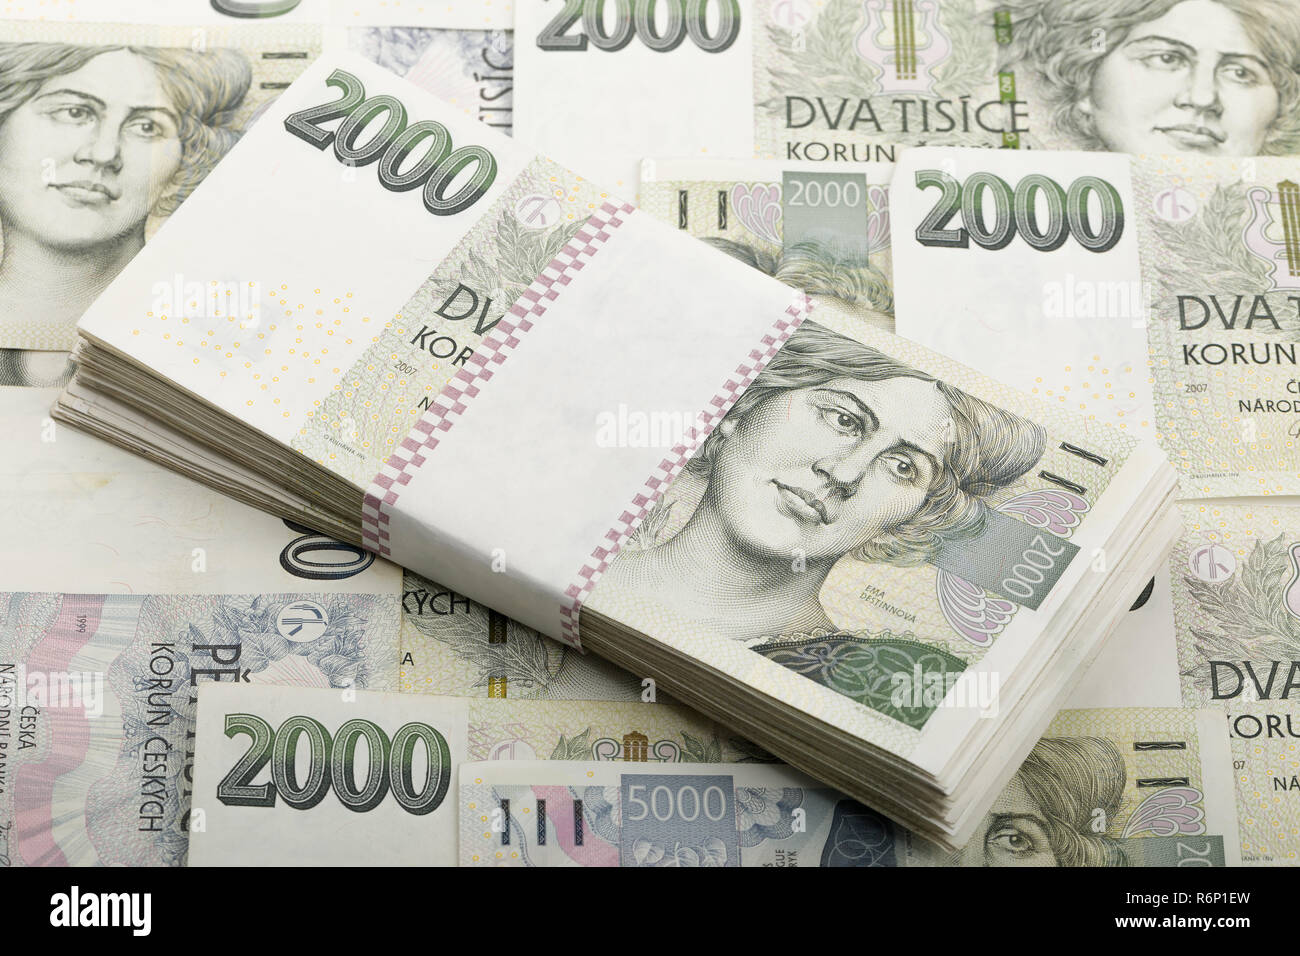 czech banknotes 5 and 2 thousand crowns Stock Photo